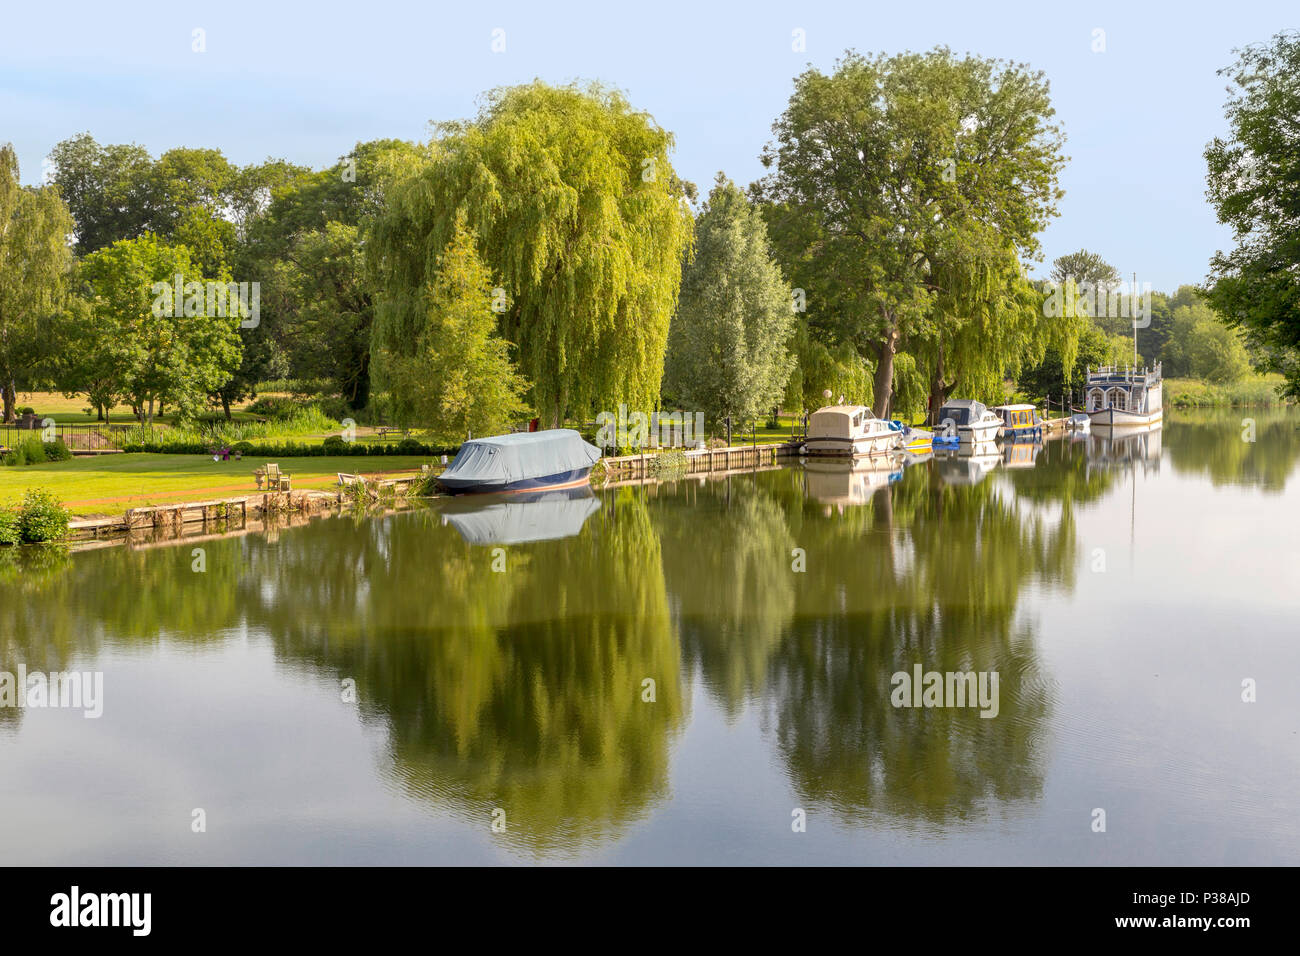 Early morning tranquility with scenic reflections on River Thames in Streatley, West Berkshire, England, Great Britain, United Kingdom. Stock Photo